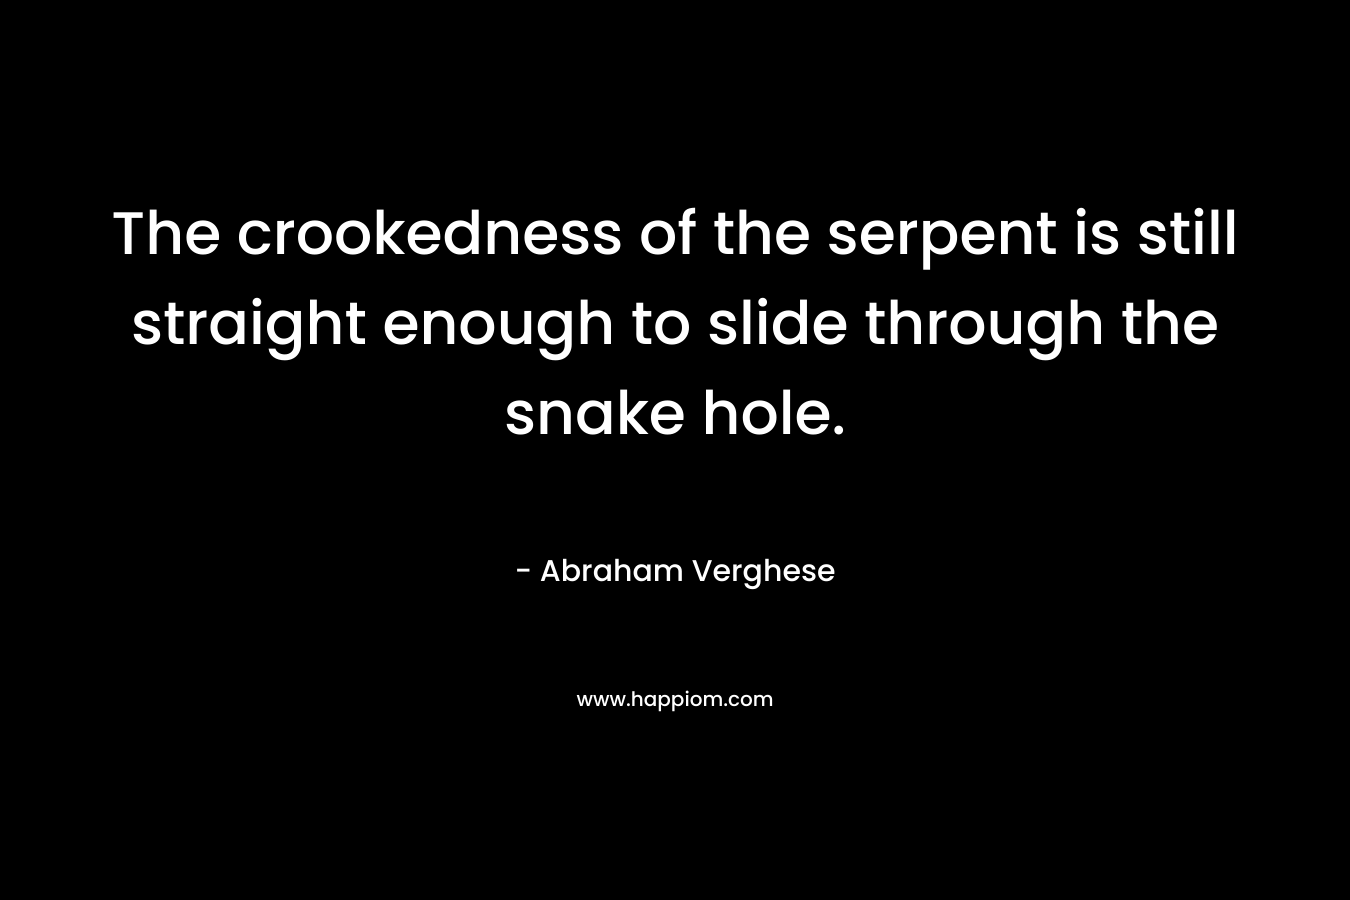 The crookedness of the serpent is still straight enough to slide through the snake hole. – Abraham Verghese